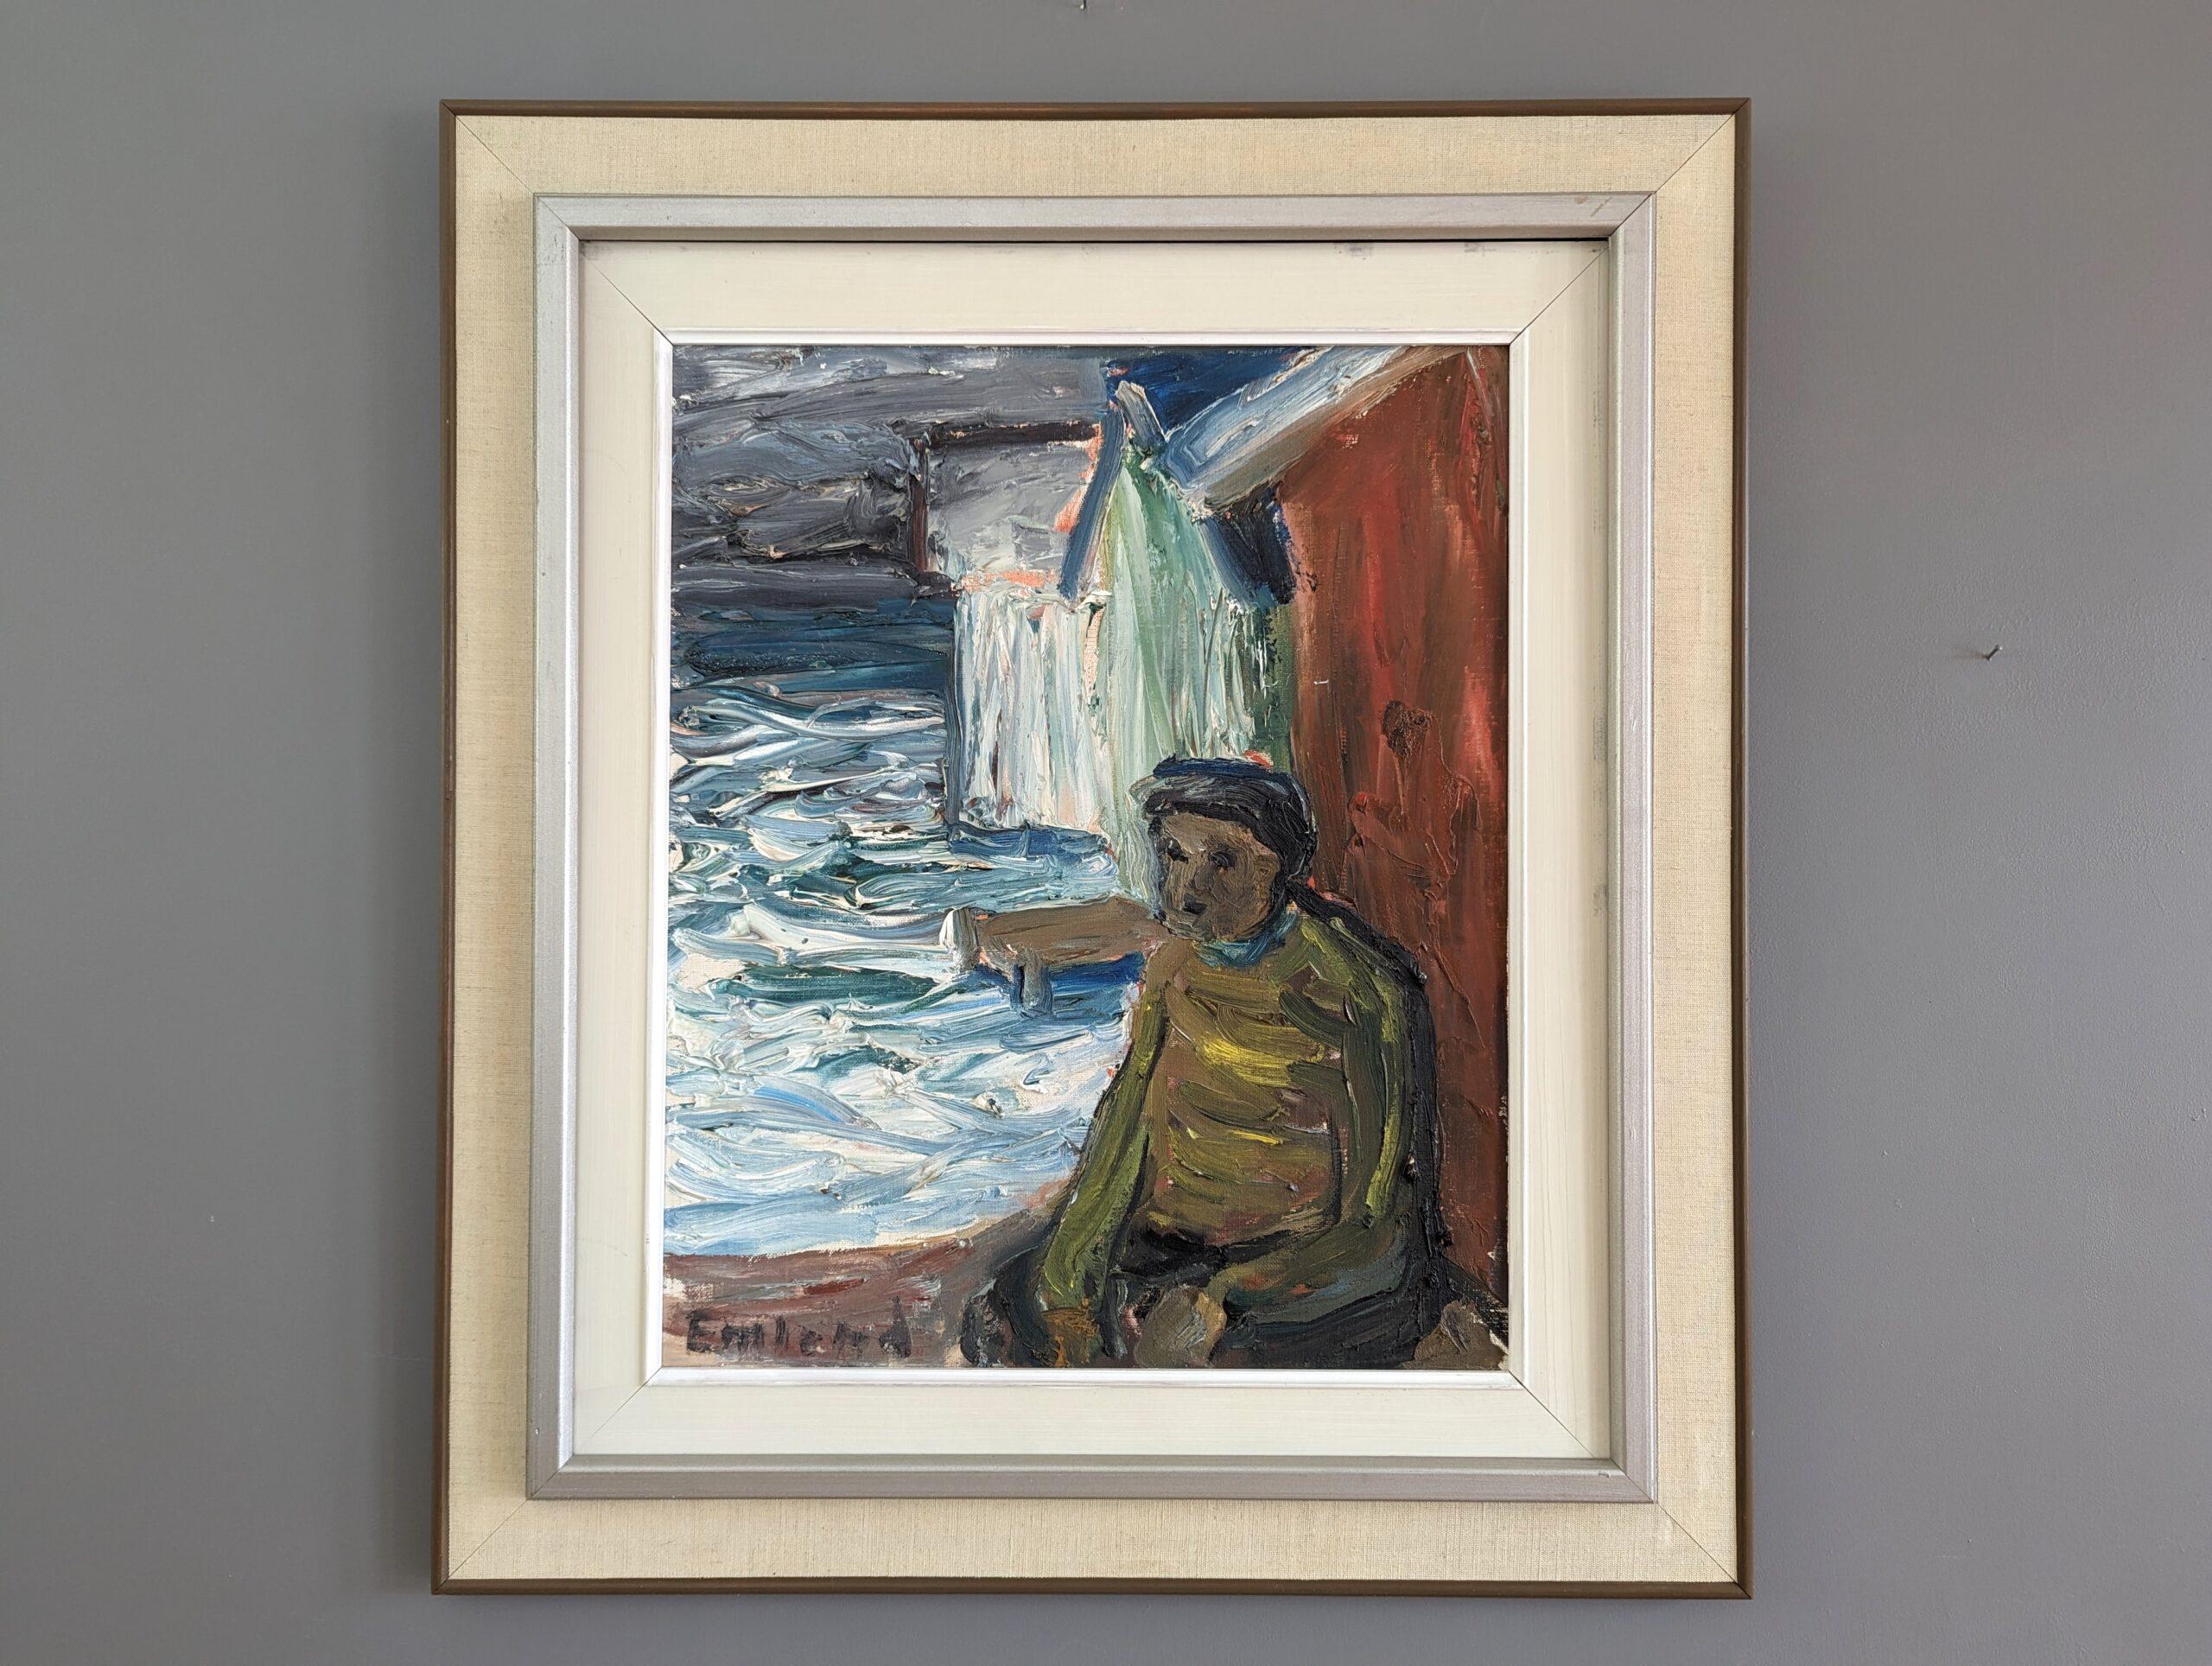 WATCHING THE WAVES
Size: 66 x 58 cm (including frame)
Oil on Canvas 

An expressive and beautifully textured mid-century seascape composition, painted in oil onto canvas.

Executed in rich colours and confident brushstrokes, this artwork depicts a